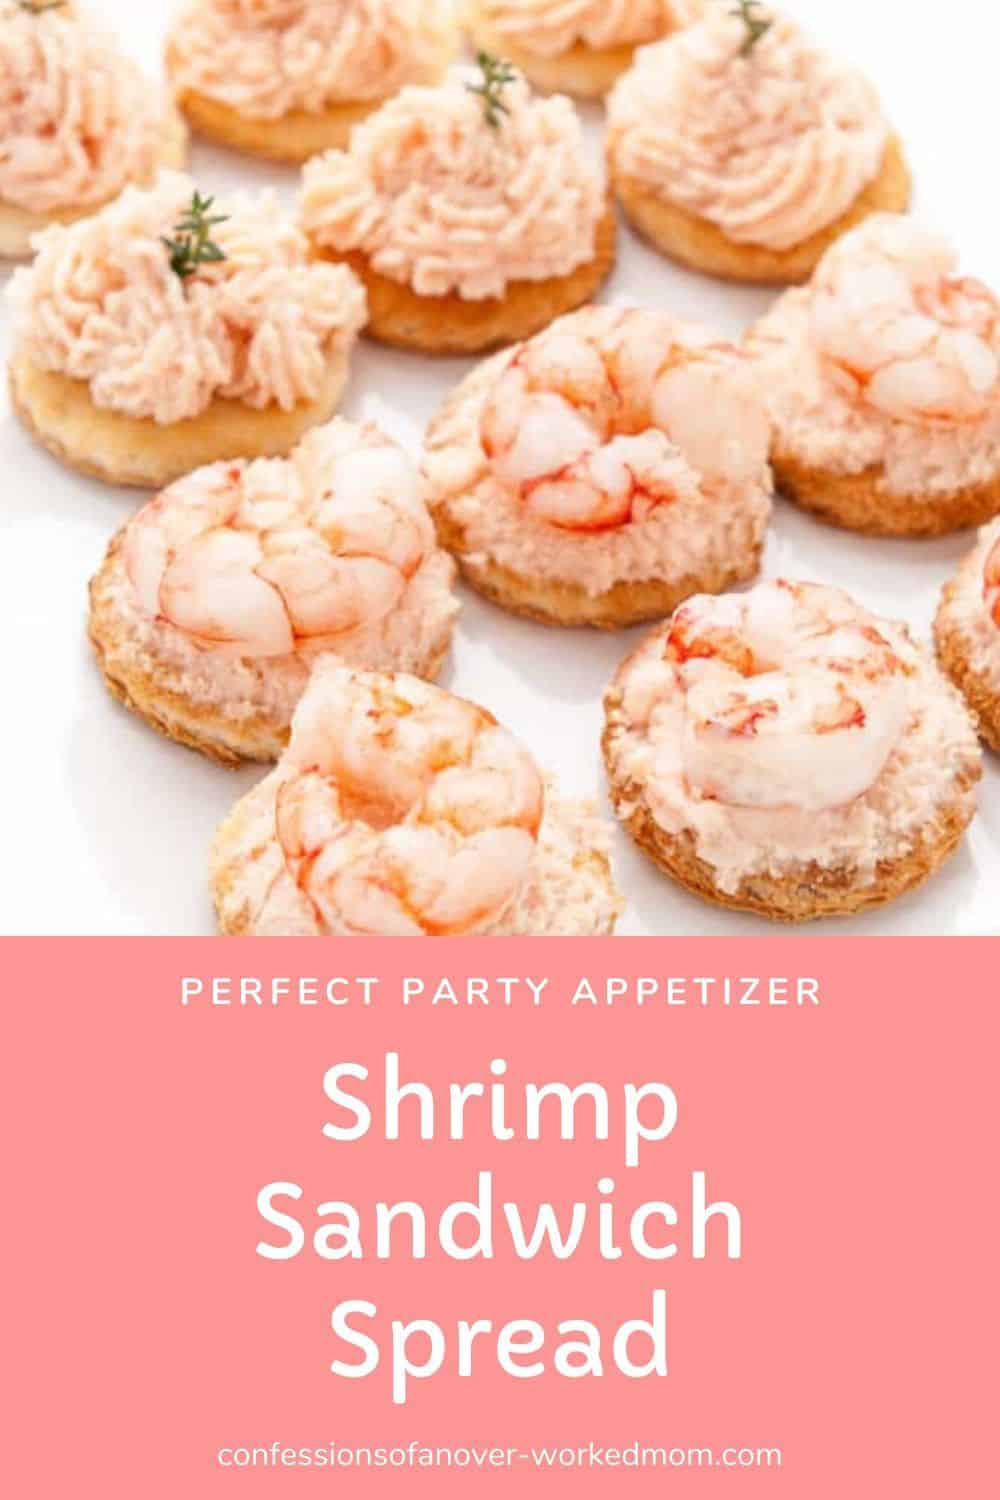 Easy shrimp sandwich spread for a dye free pink party